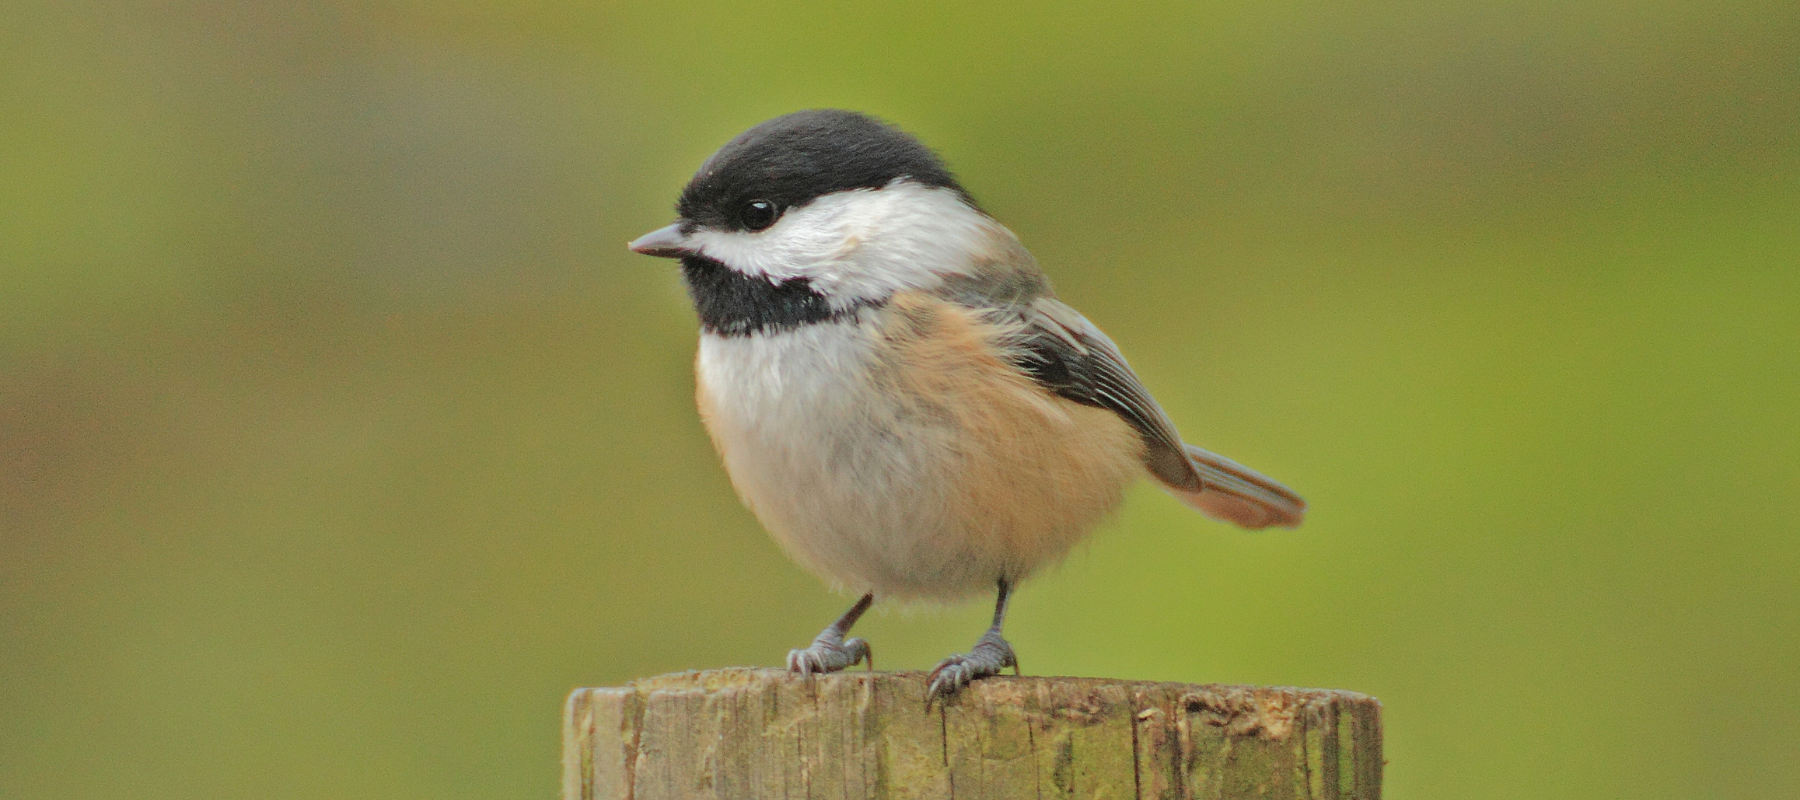 A Guide on How to Attract Chickadees to Your Backyard